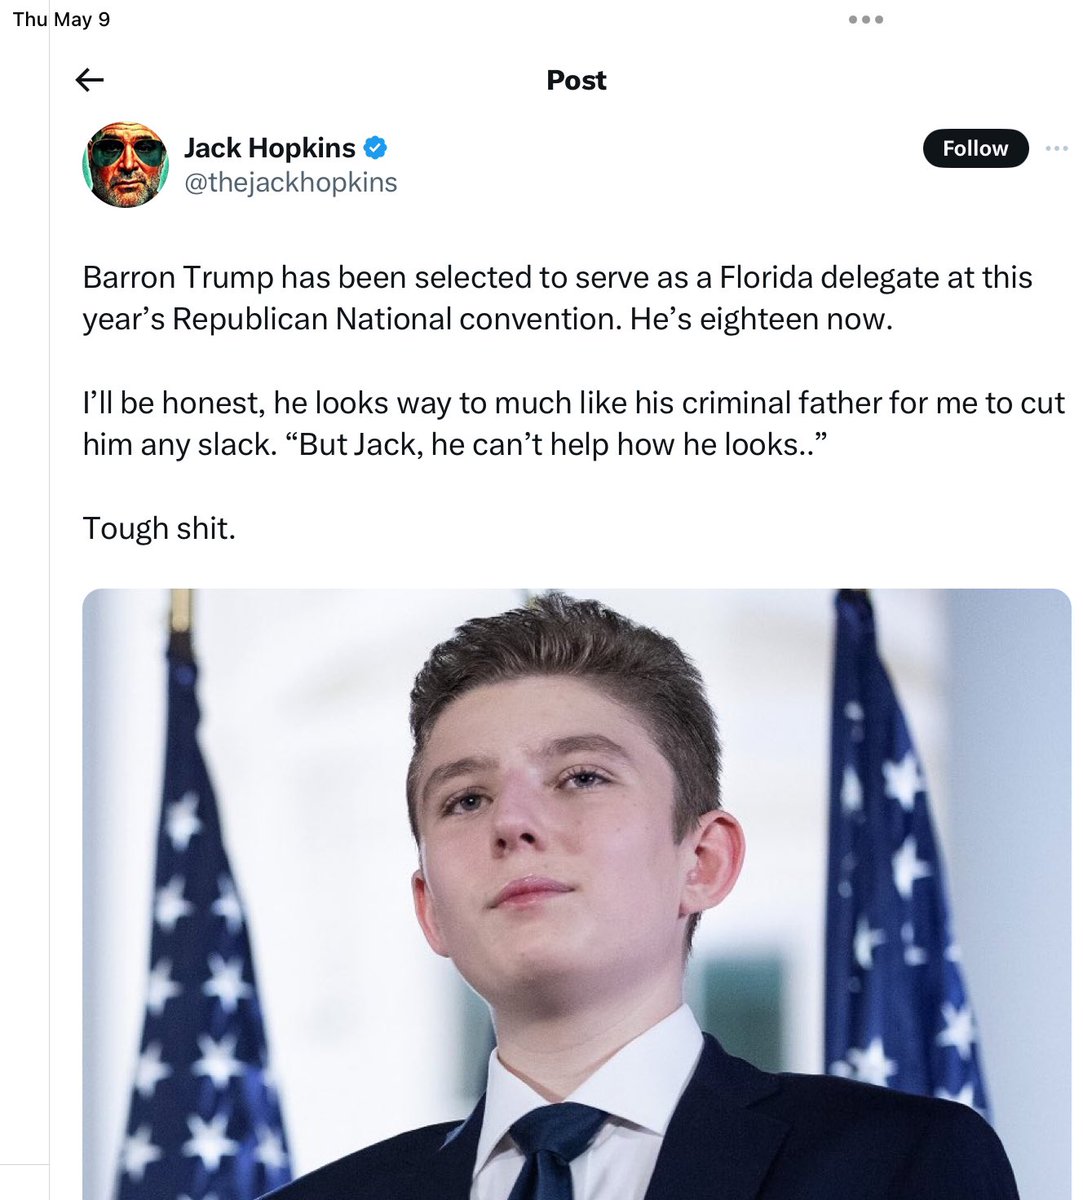 Look at this sick freak - @thejackhopkins - declaring open season on 18-yo Barron Trump, and all the leftist-progressive sycophants lining up to vilify the young man all for the fact that he was born a Trump.

Does Jack Hopkins think this makes him a “big” man?  What a soft,…